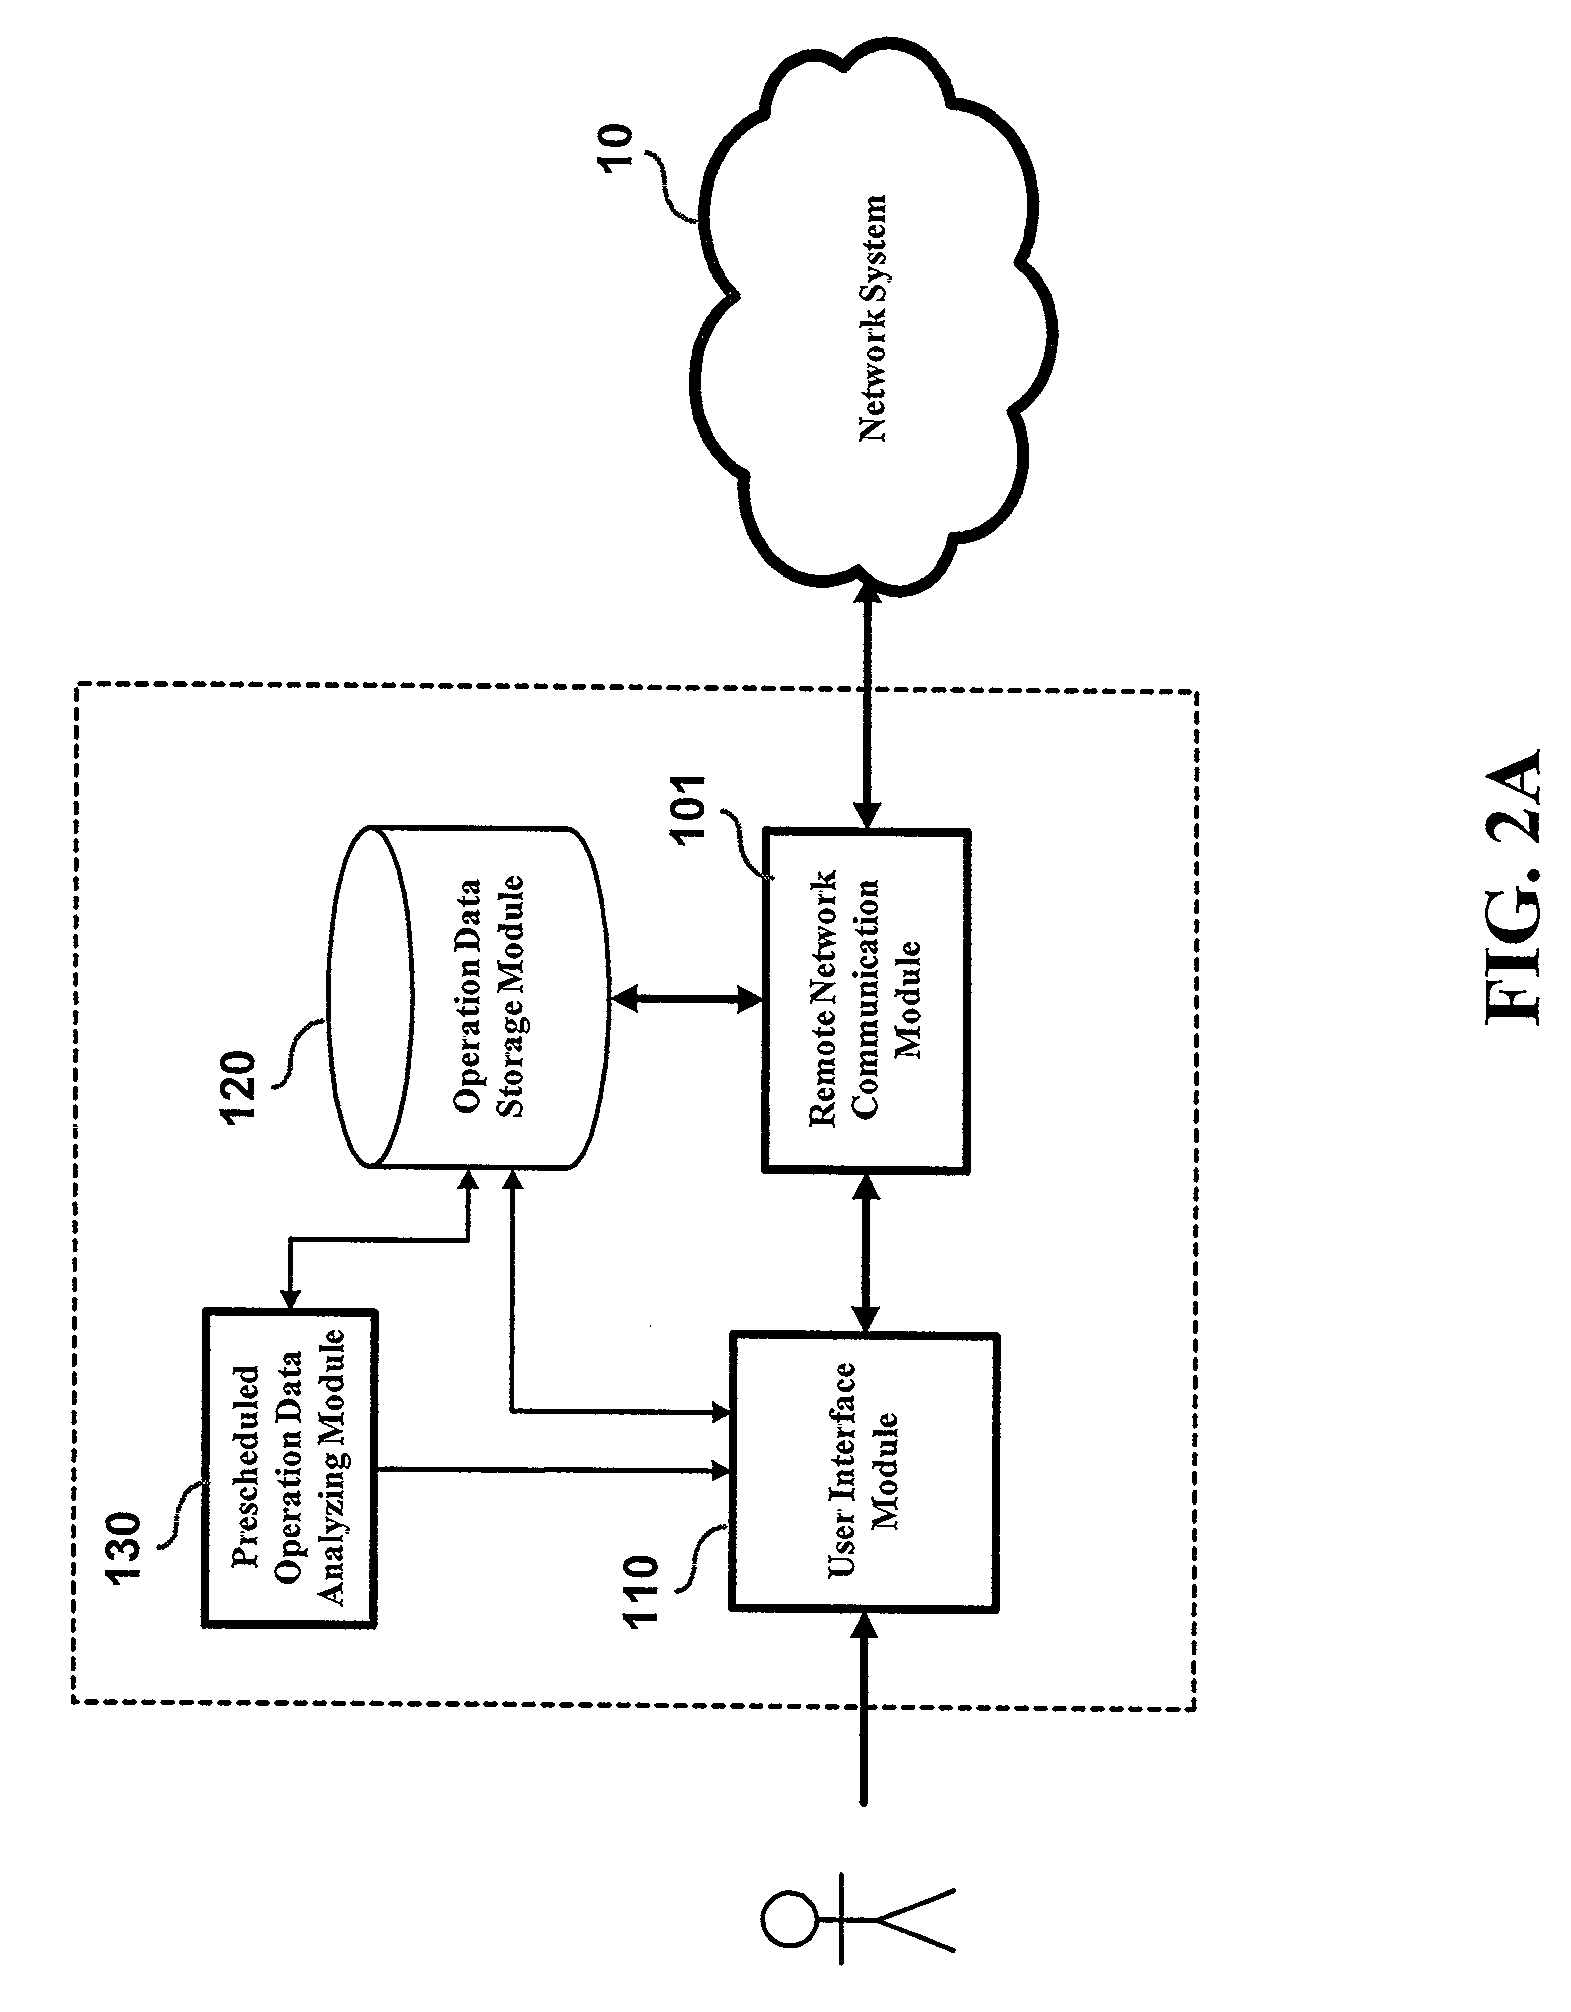 Network-based air-conditioning equipment remote monitoring and management system